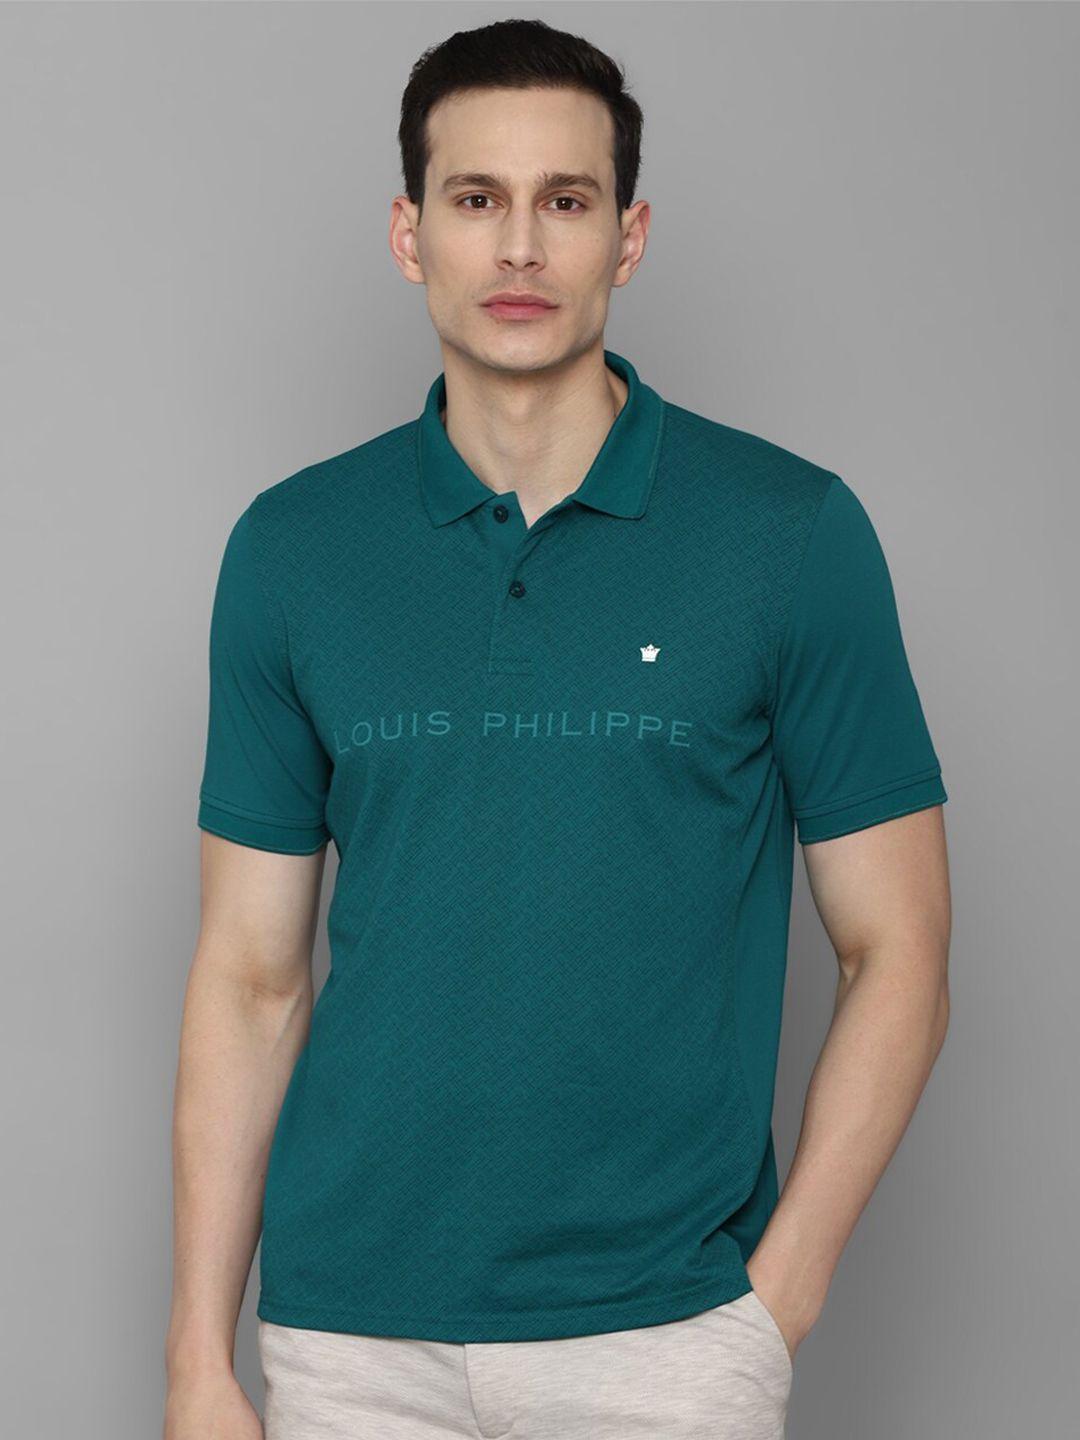 louis philippe typography printed polo collar t-shirt